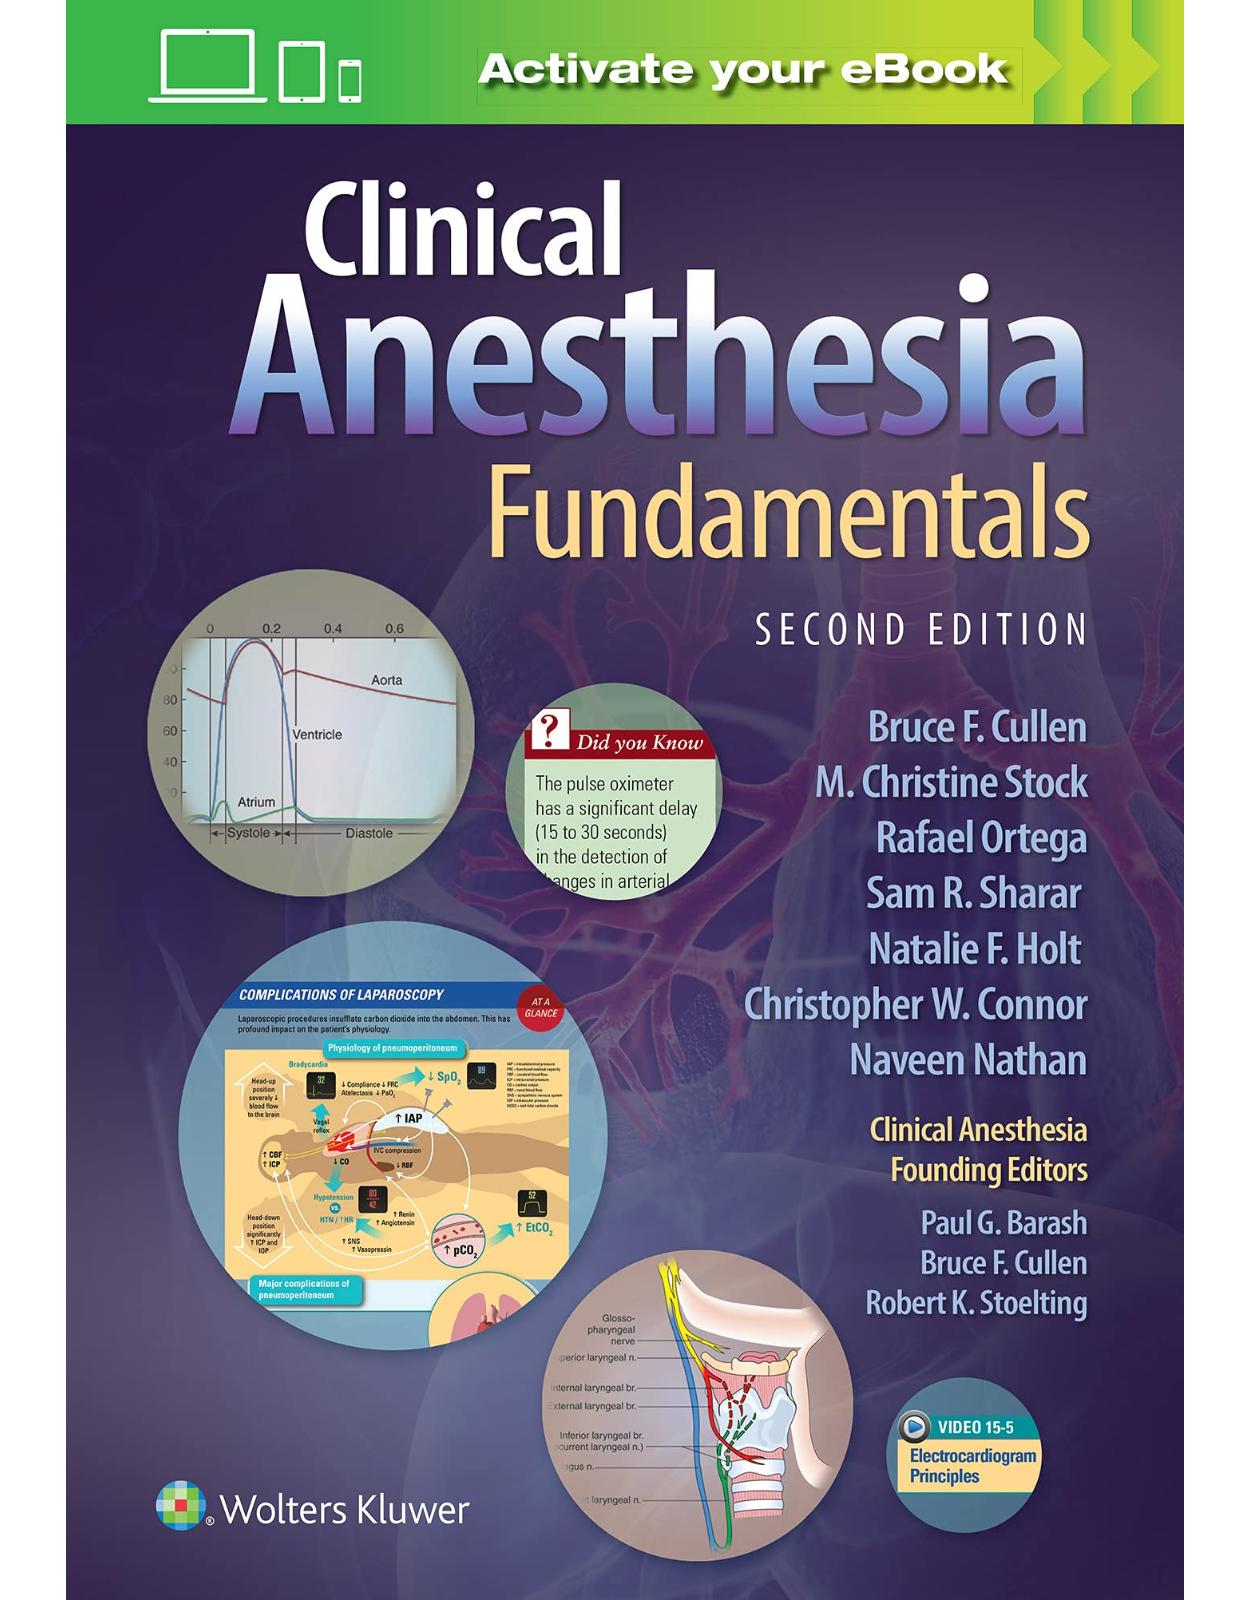 Clinical Anesthesia Fundamentals: Print + Virtual version with Multimedia